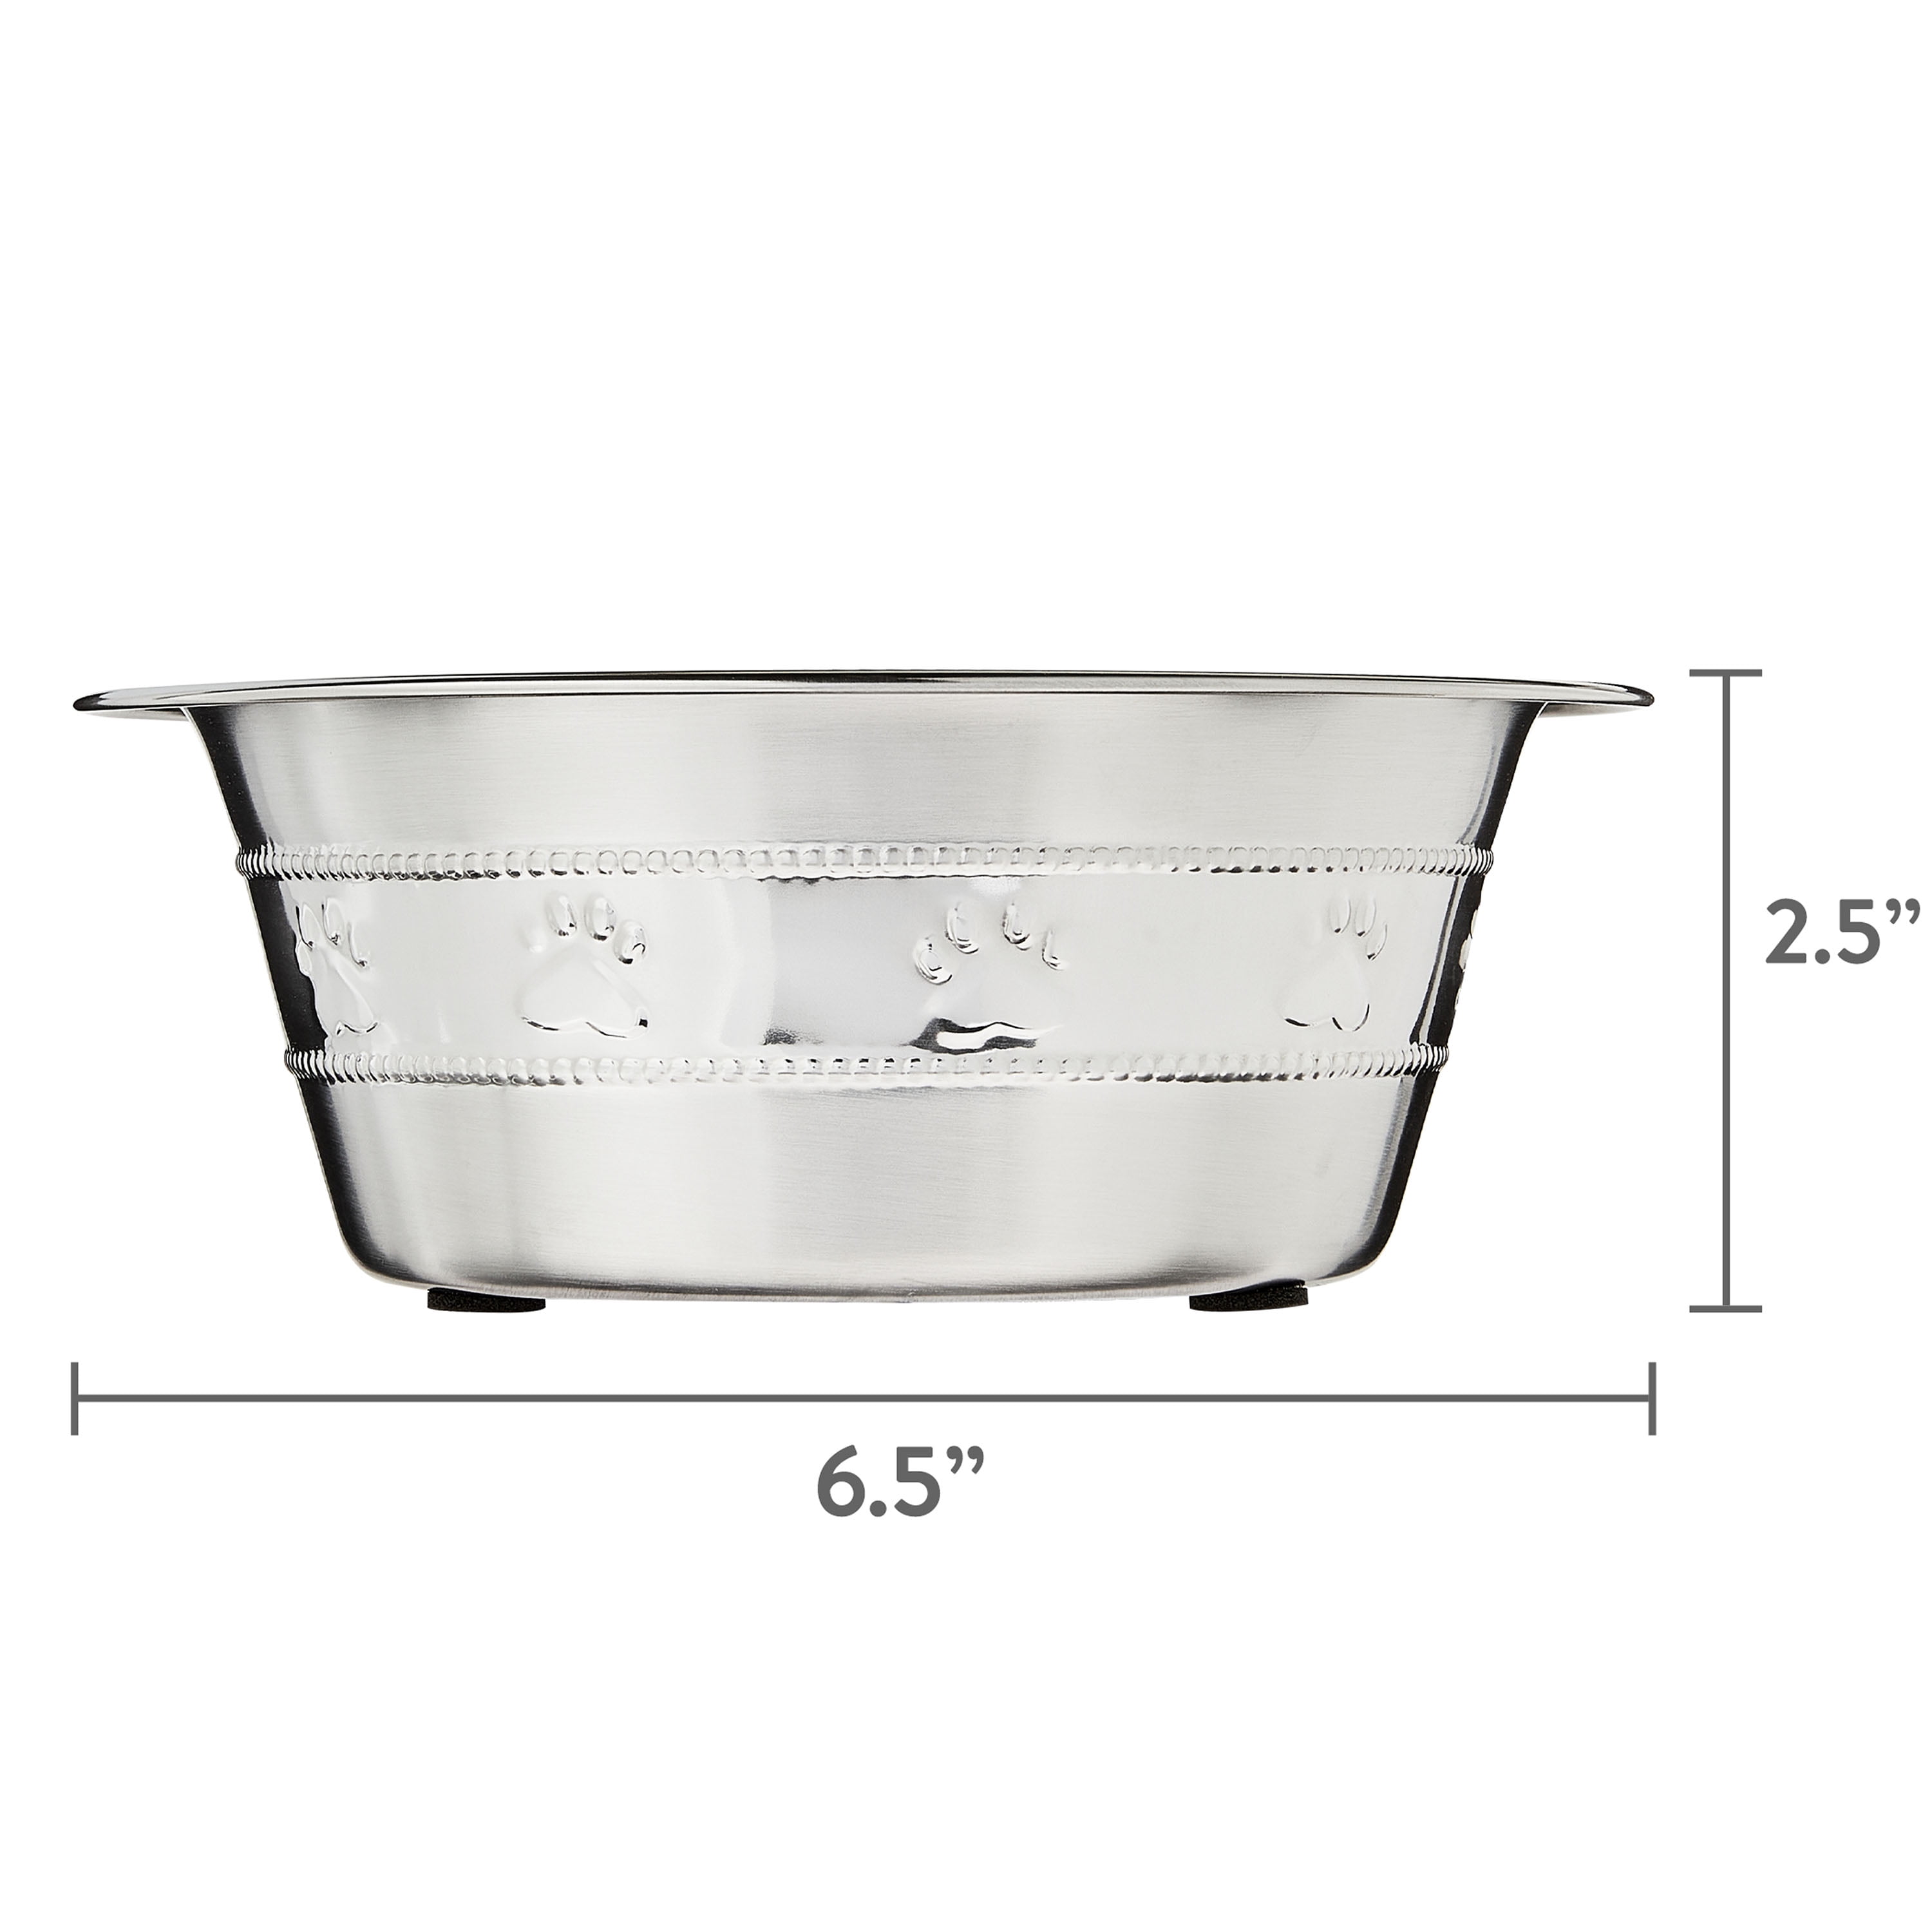 PEDAY peday large dog water bowl 304 stainless steel extra large dog bowl  for big & large dogs